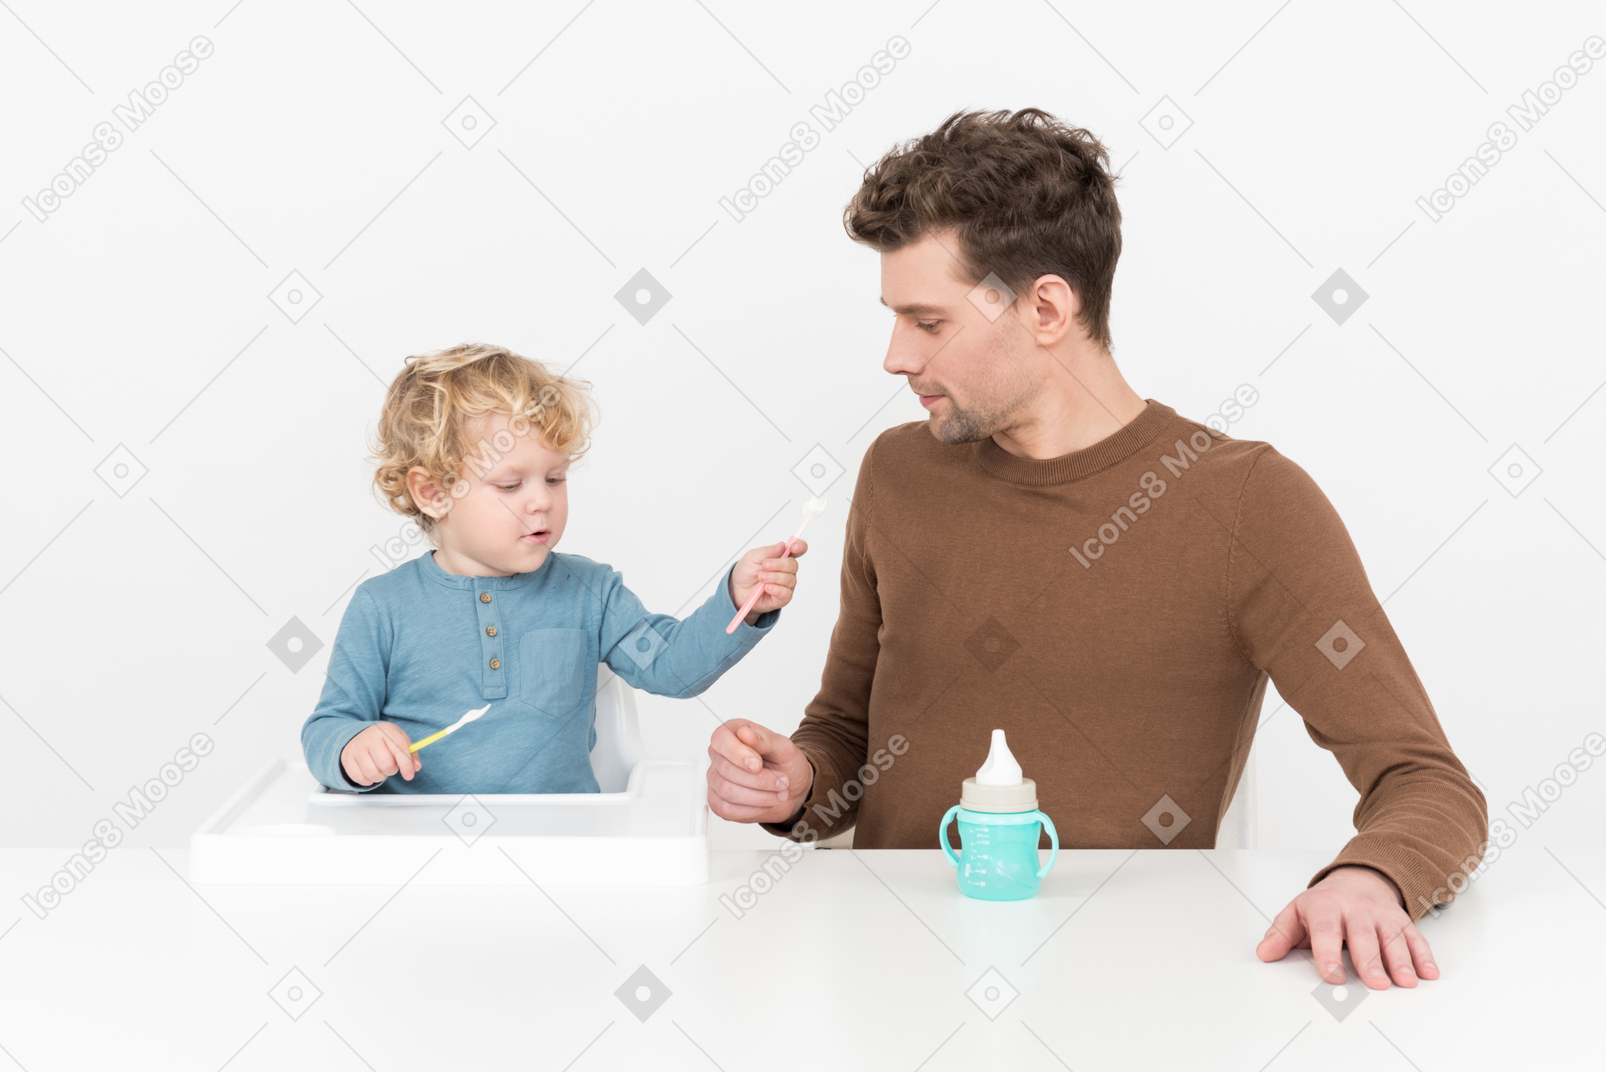 Father teaching his baby son how to use a spoon